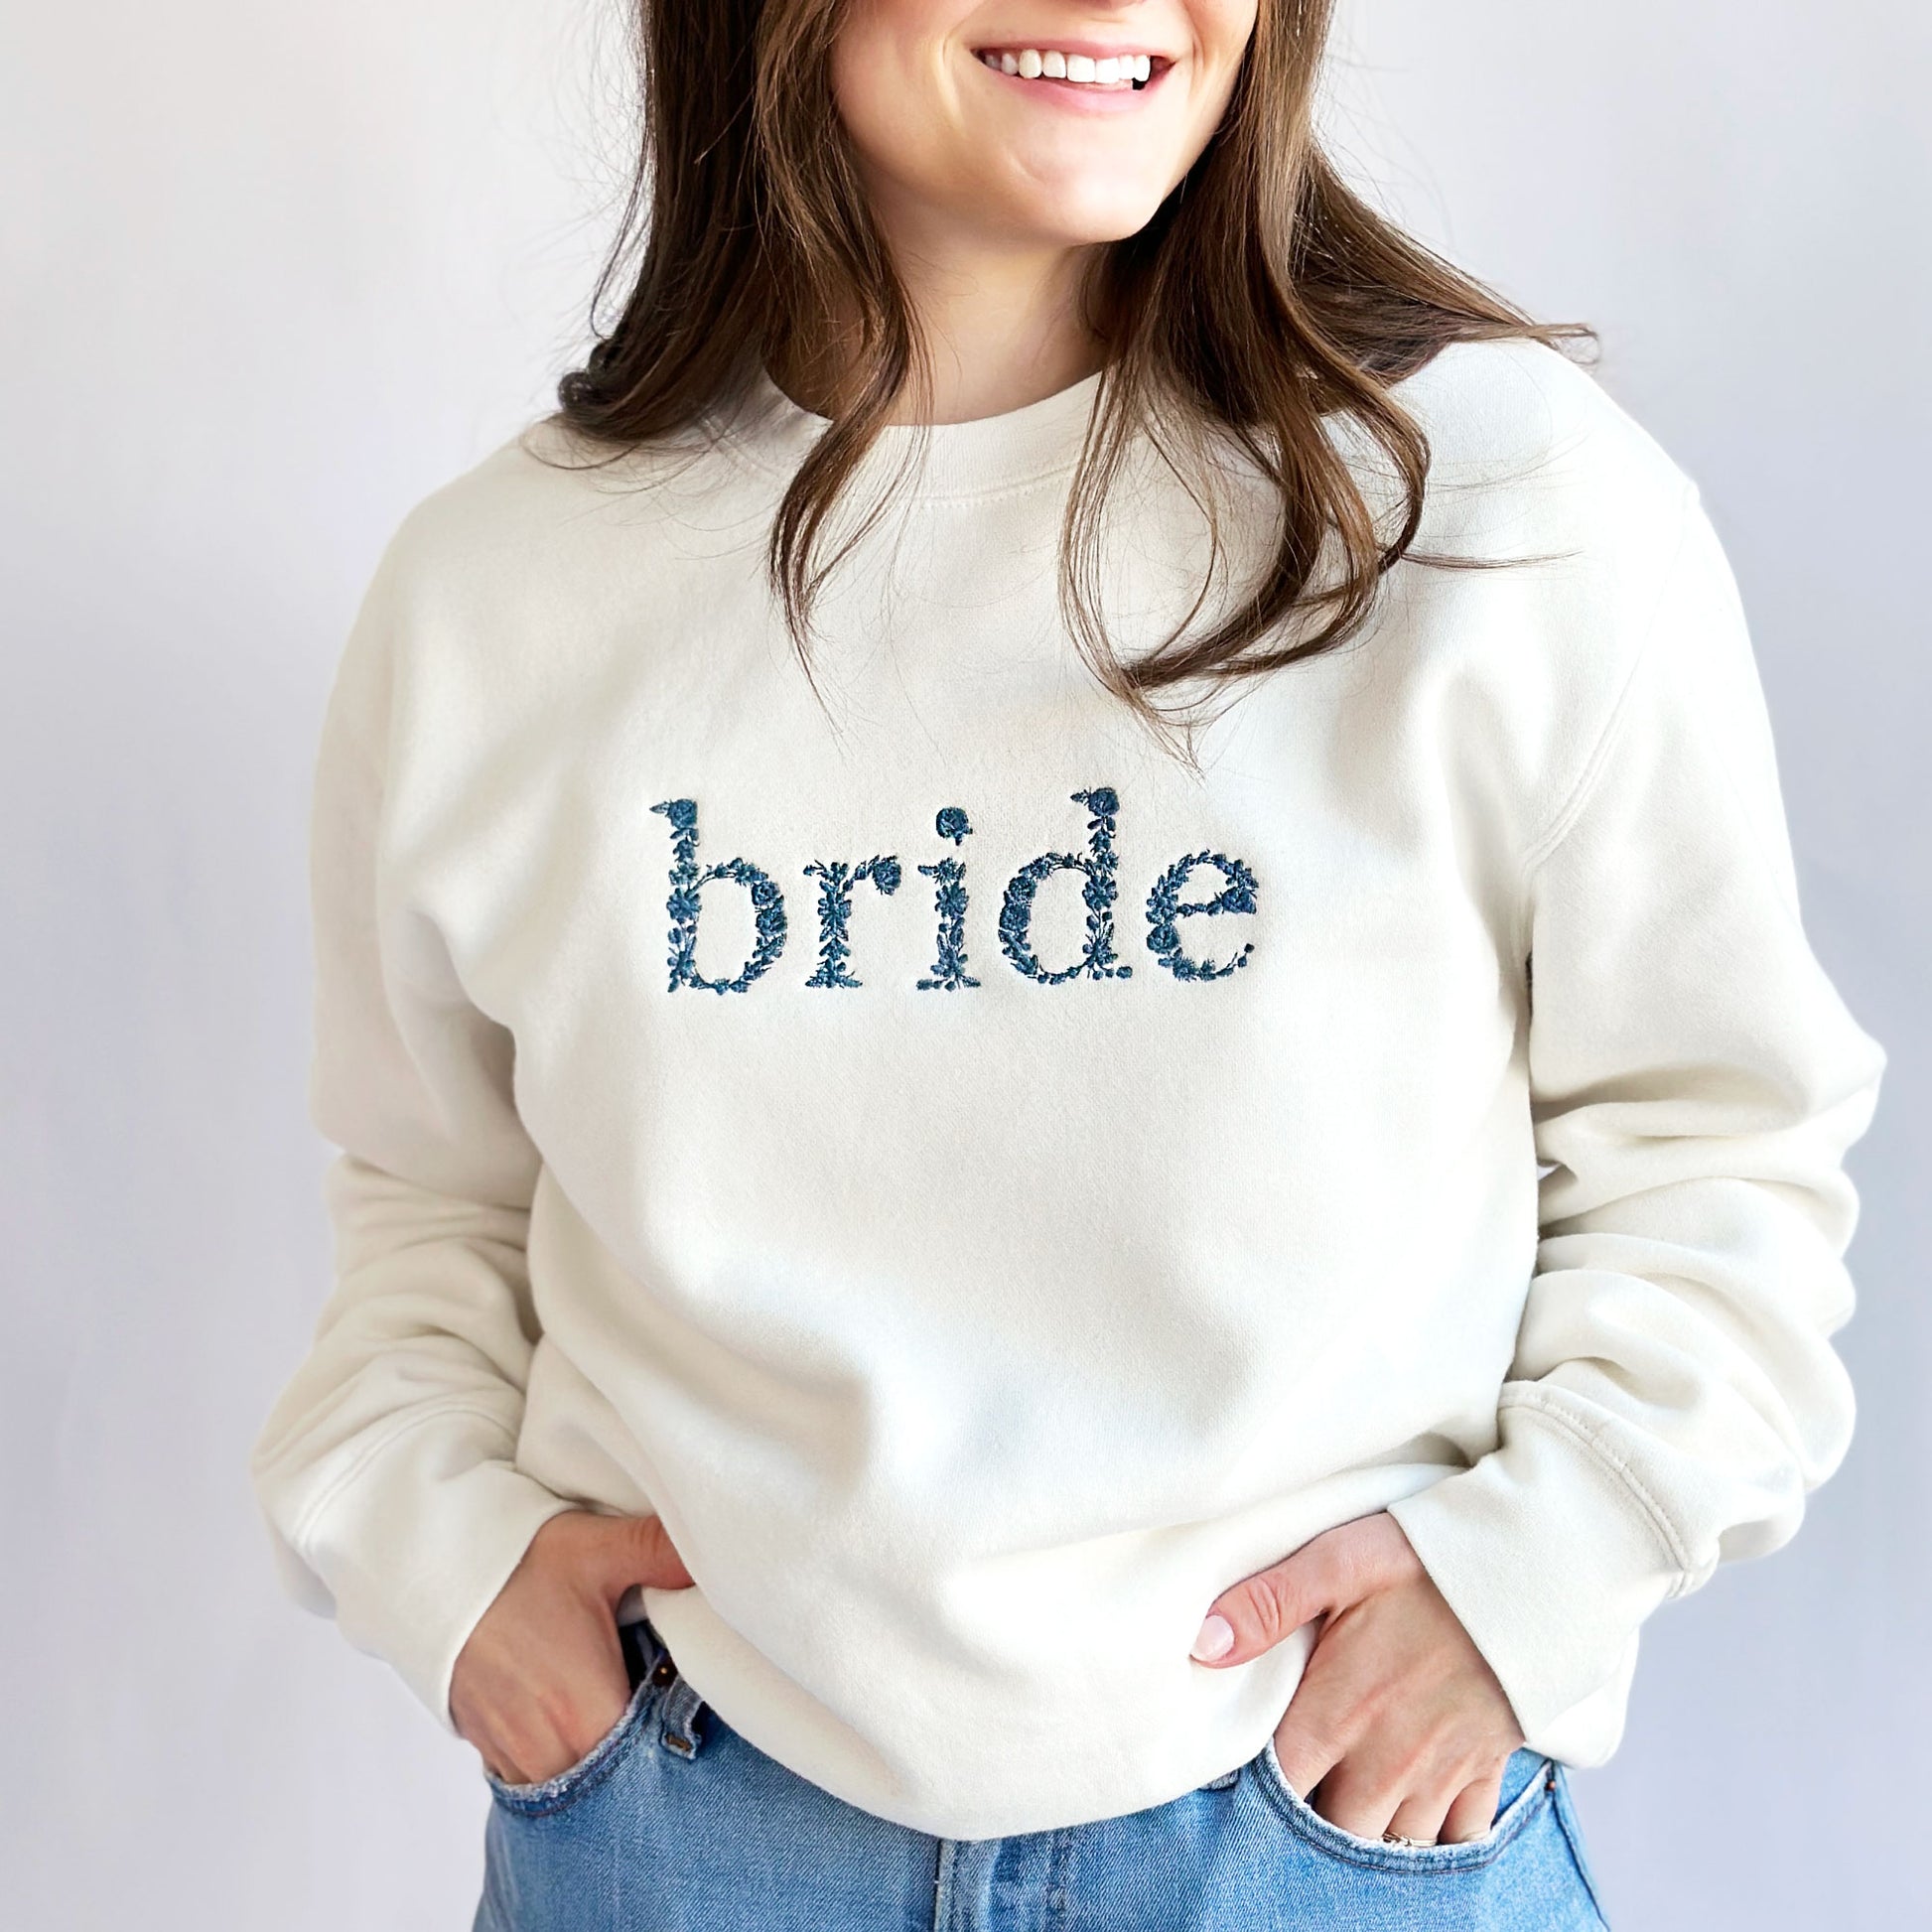 Young woman modeling a white crewneck sweatshirt with bride embroidered in floral lettering across the chest in French blue thread